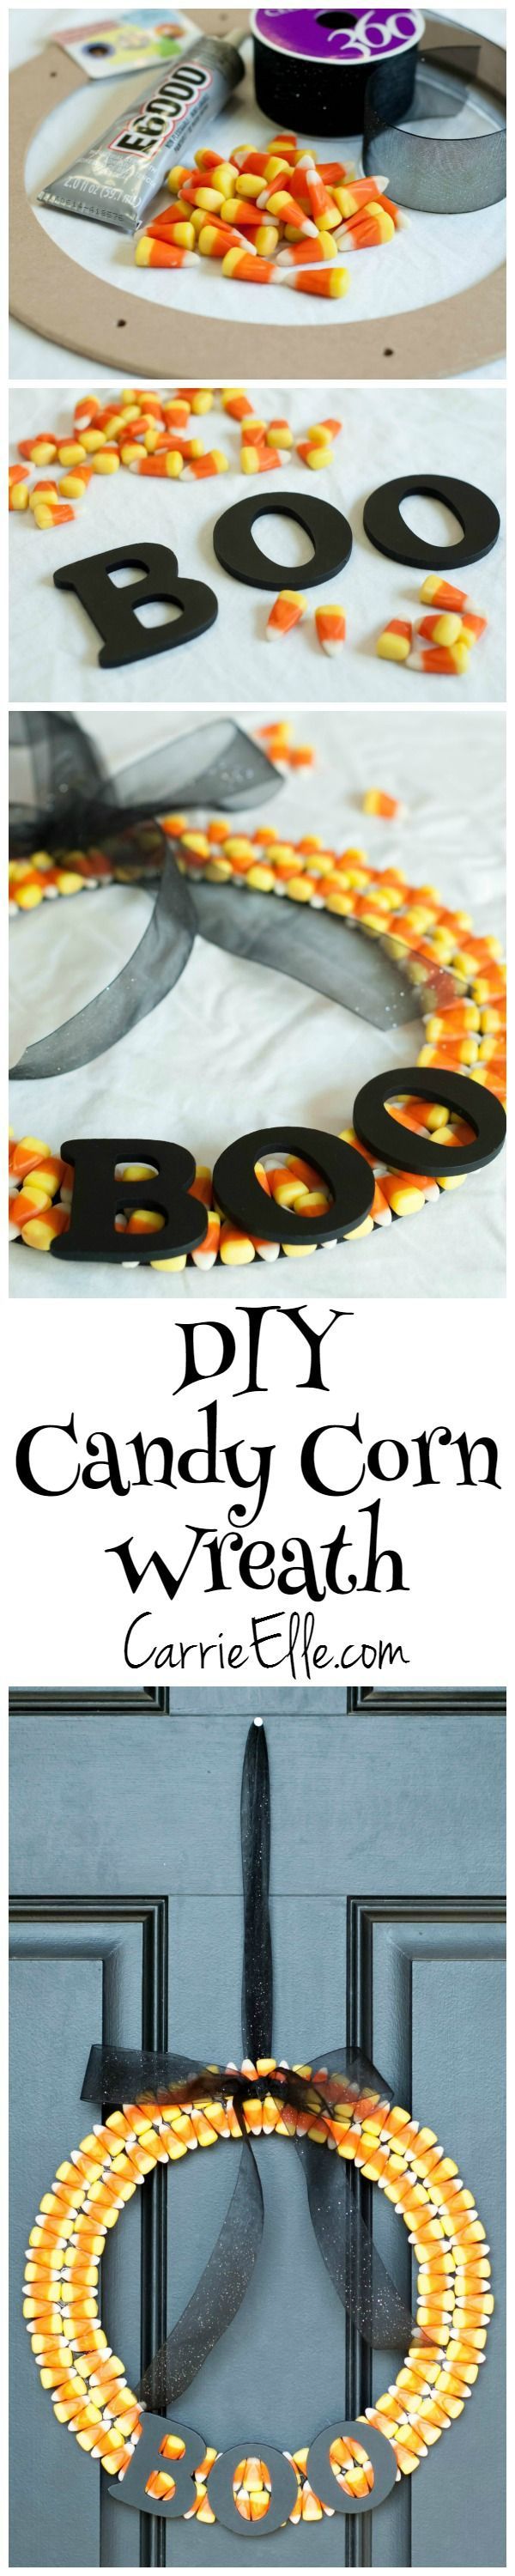 Cute, easy and cheap - this DIY Candy Corn Wreath is perfect for Fall!